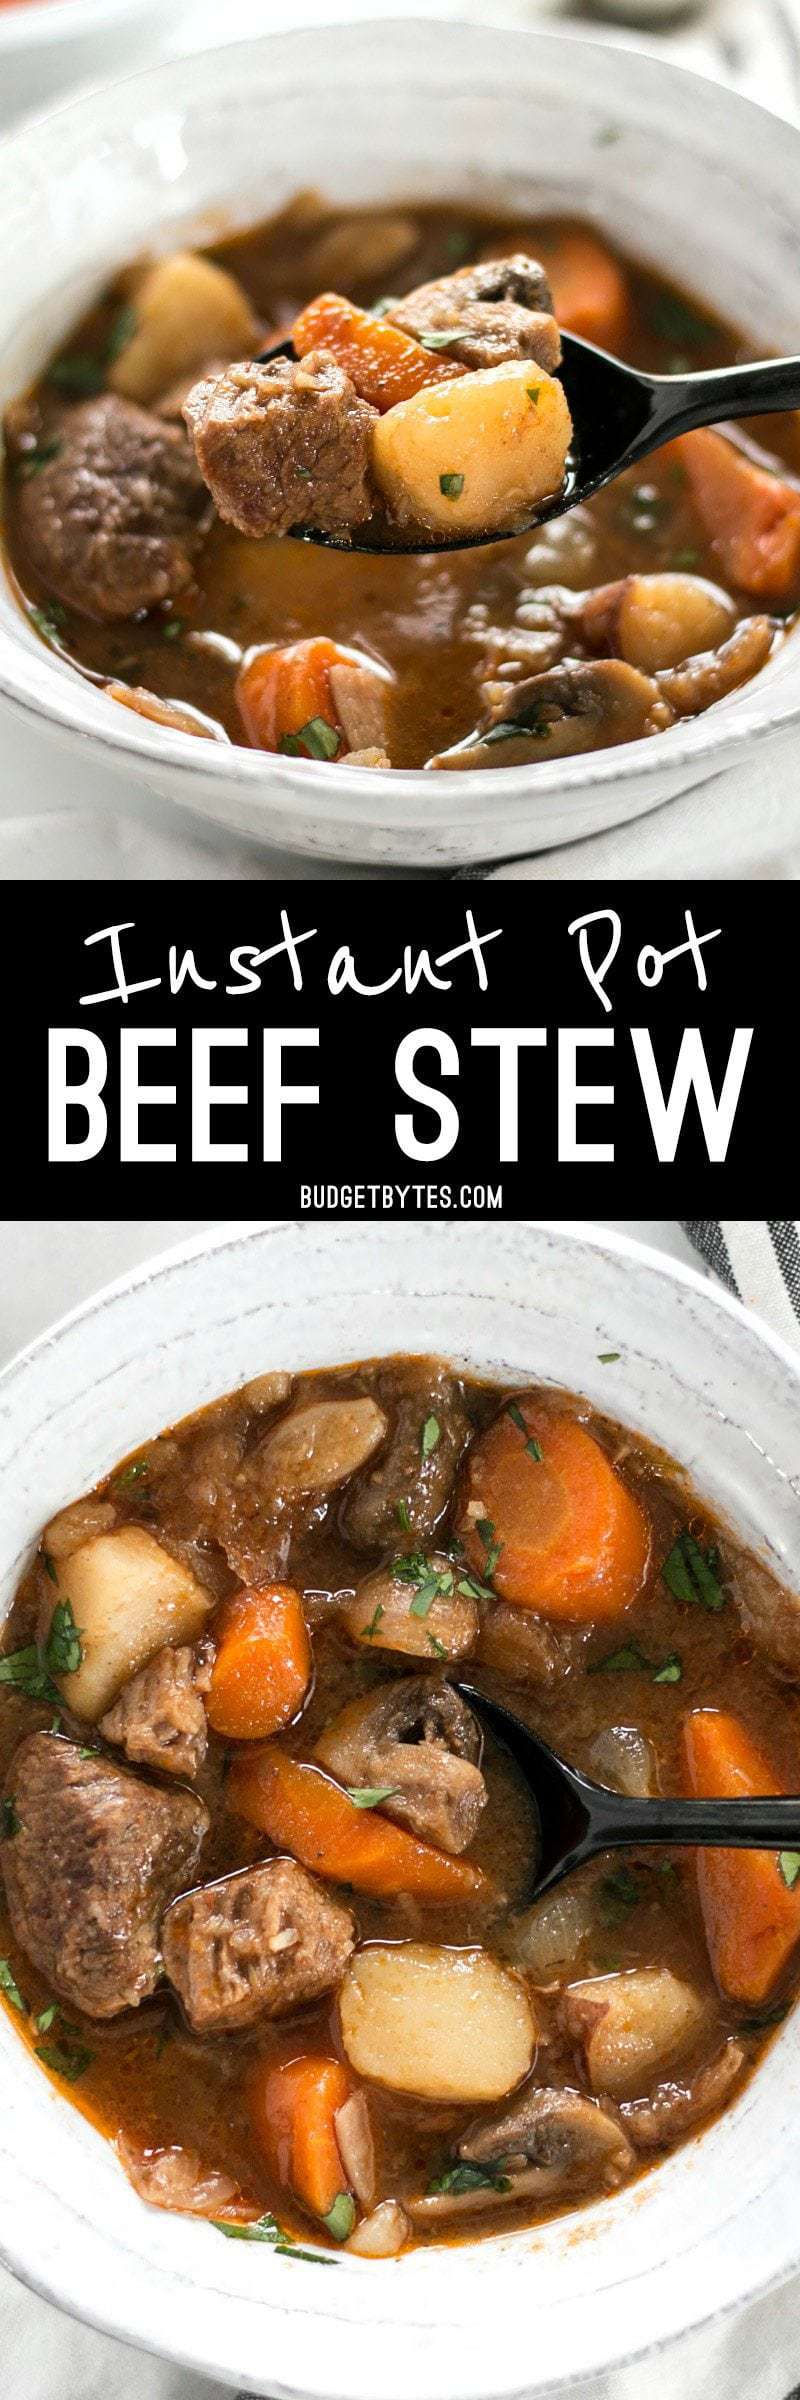 https://www.budgetbytes.com/wp-content/uploads/2017/01/Instant-Pot-Beef-Stew-Collage.jpg